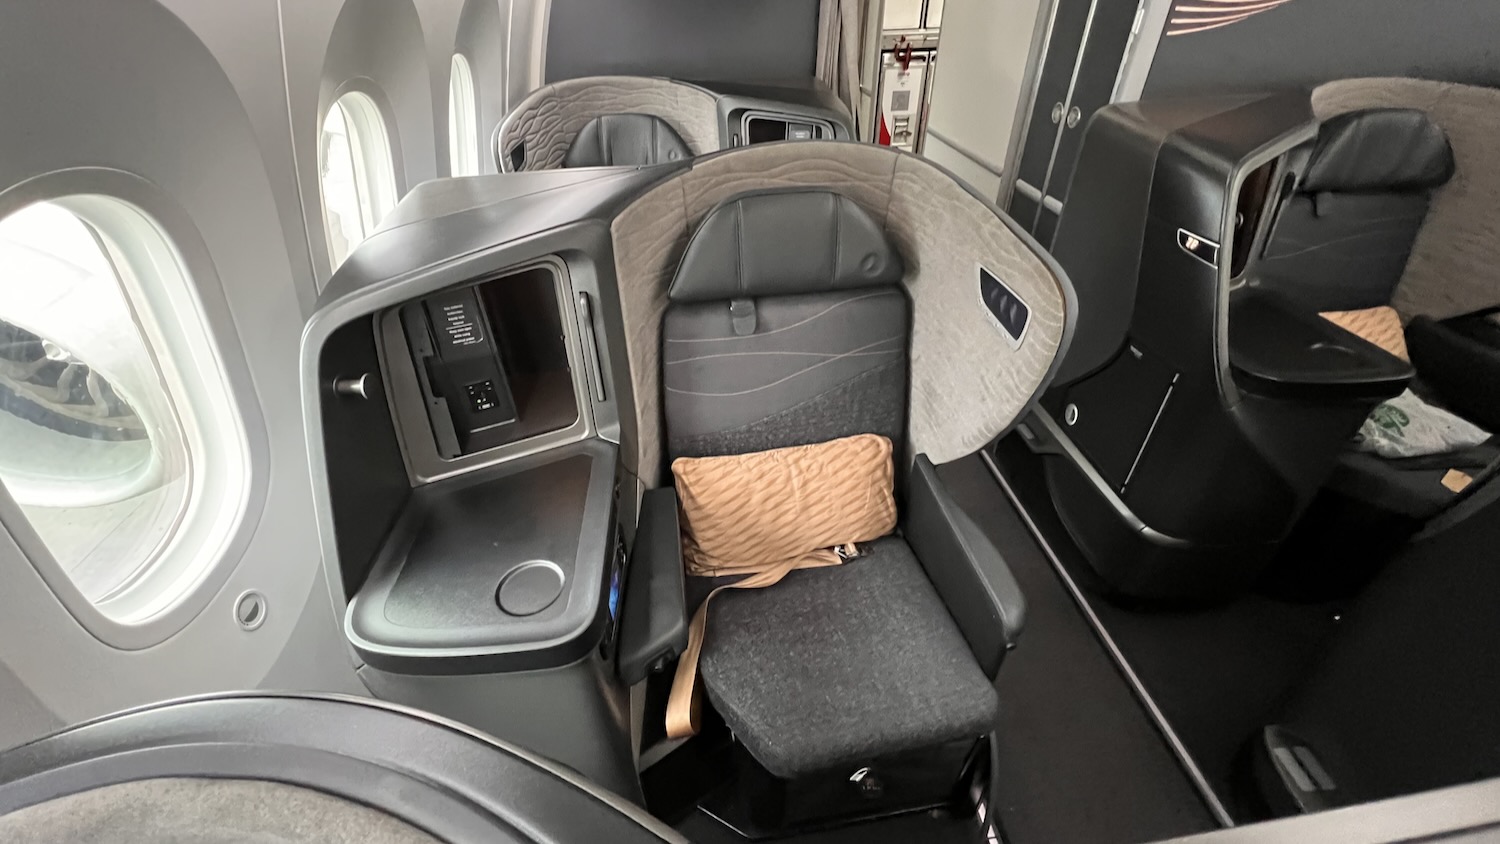 Turkish Airlines B787 Business Class